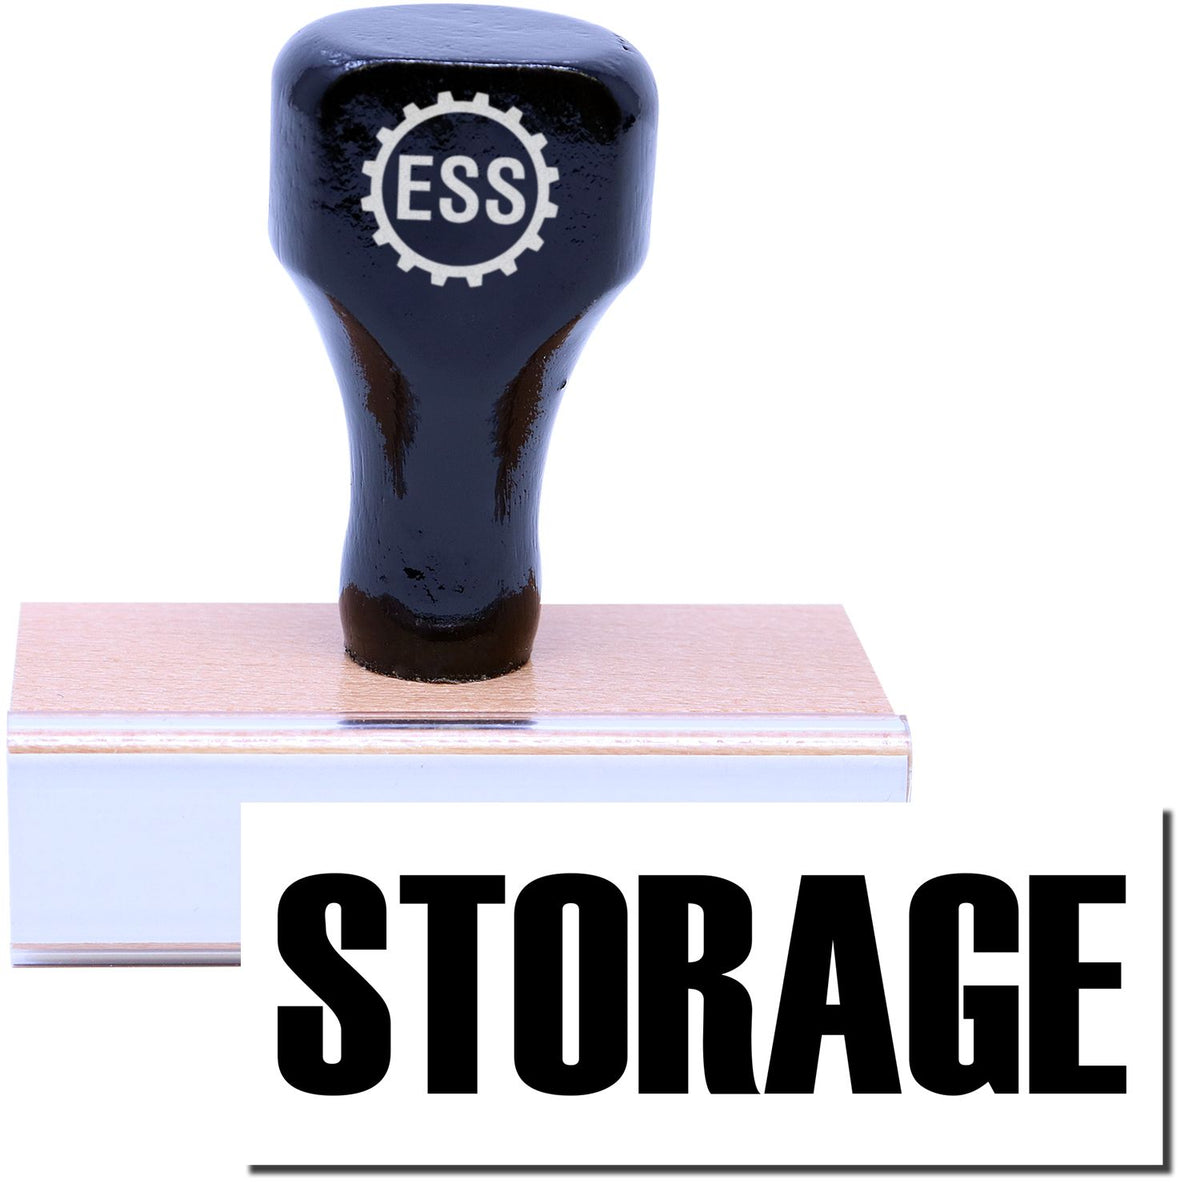 A stock office rubber stamp with a stamped image showing how the text &quot;STORAGE&quot; is displayed after stamping.